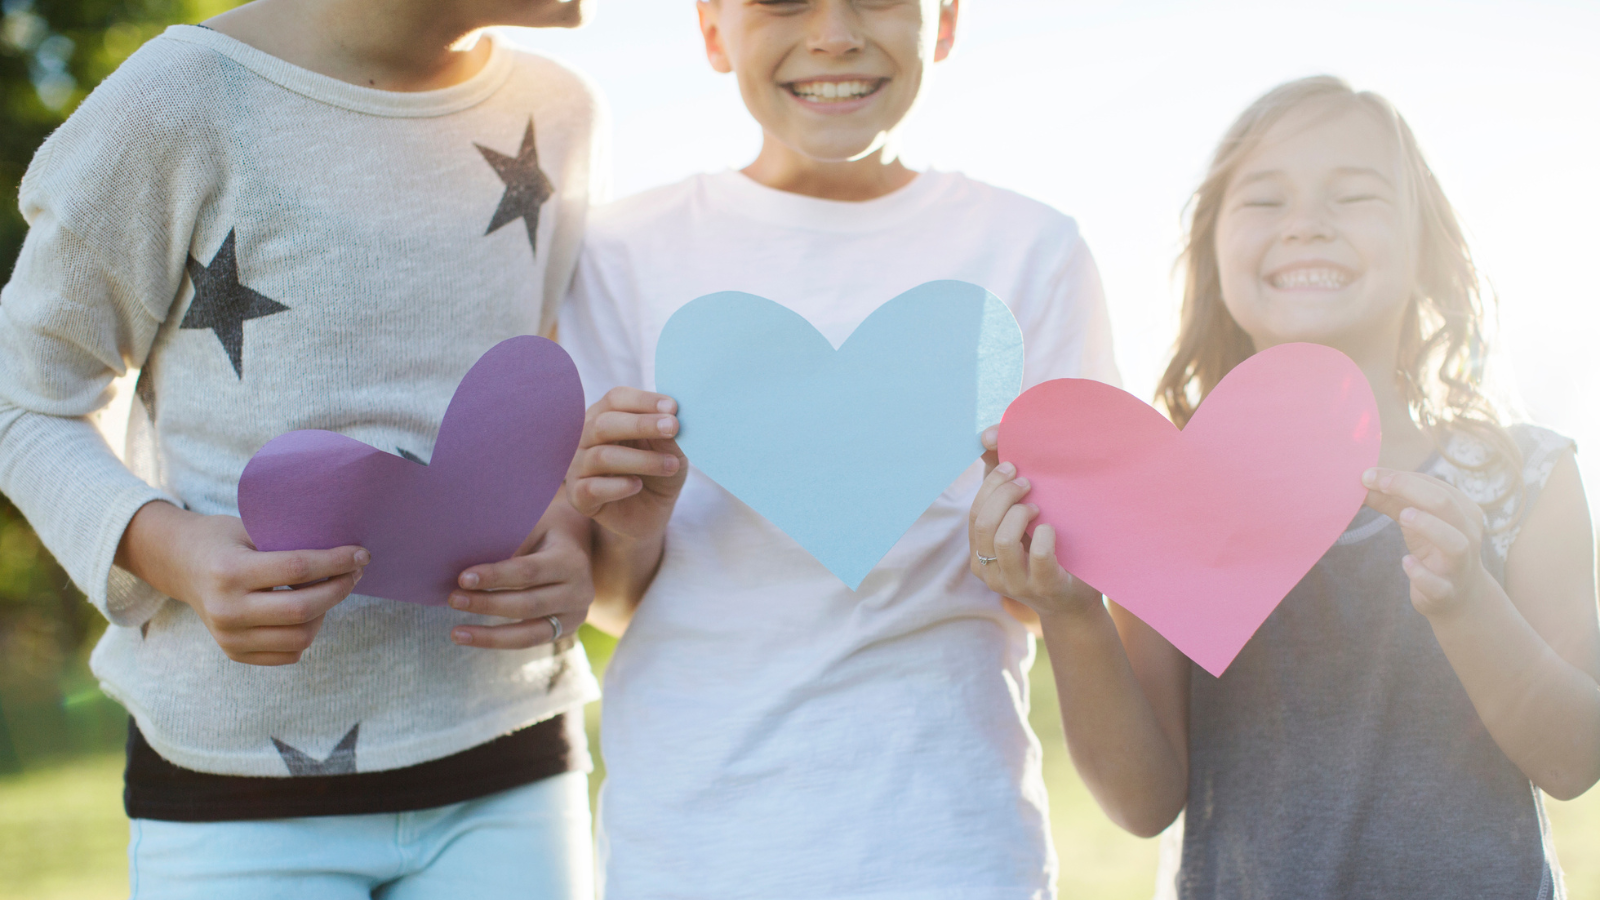 3 kids holding paper hearts